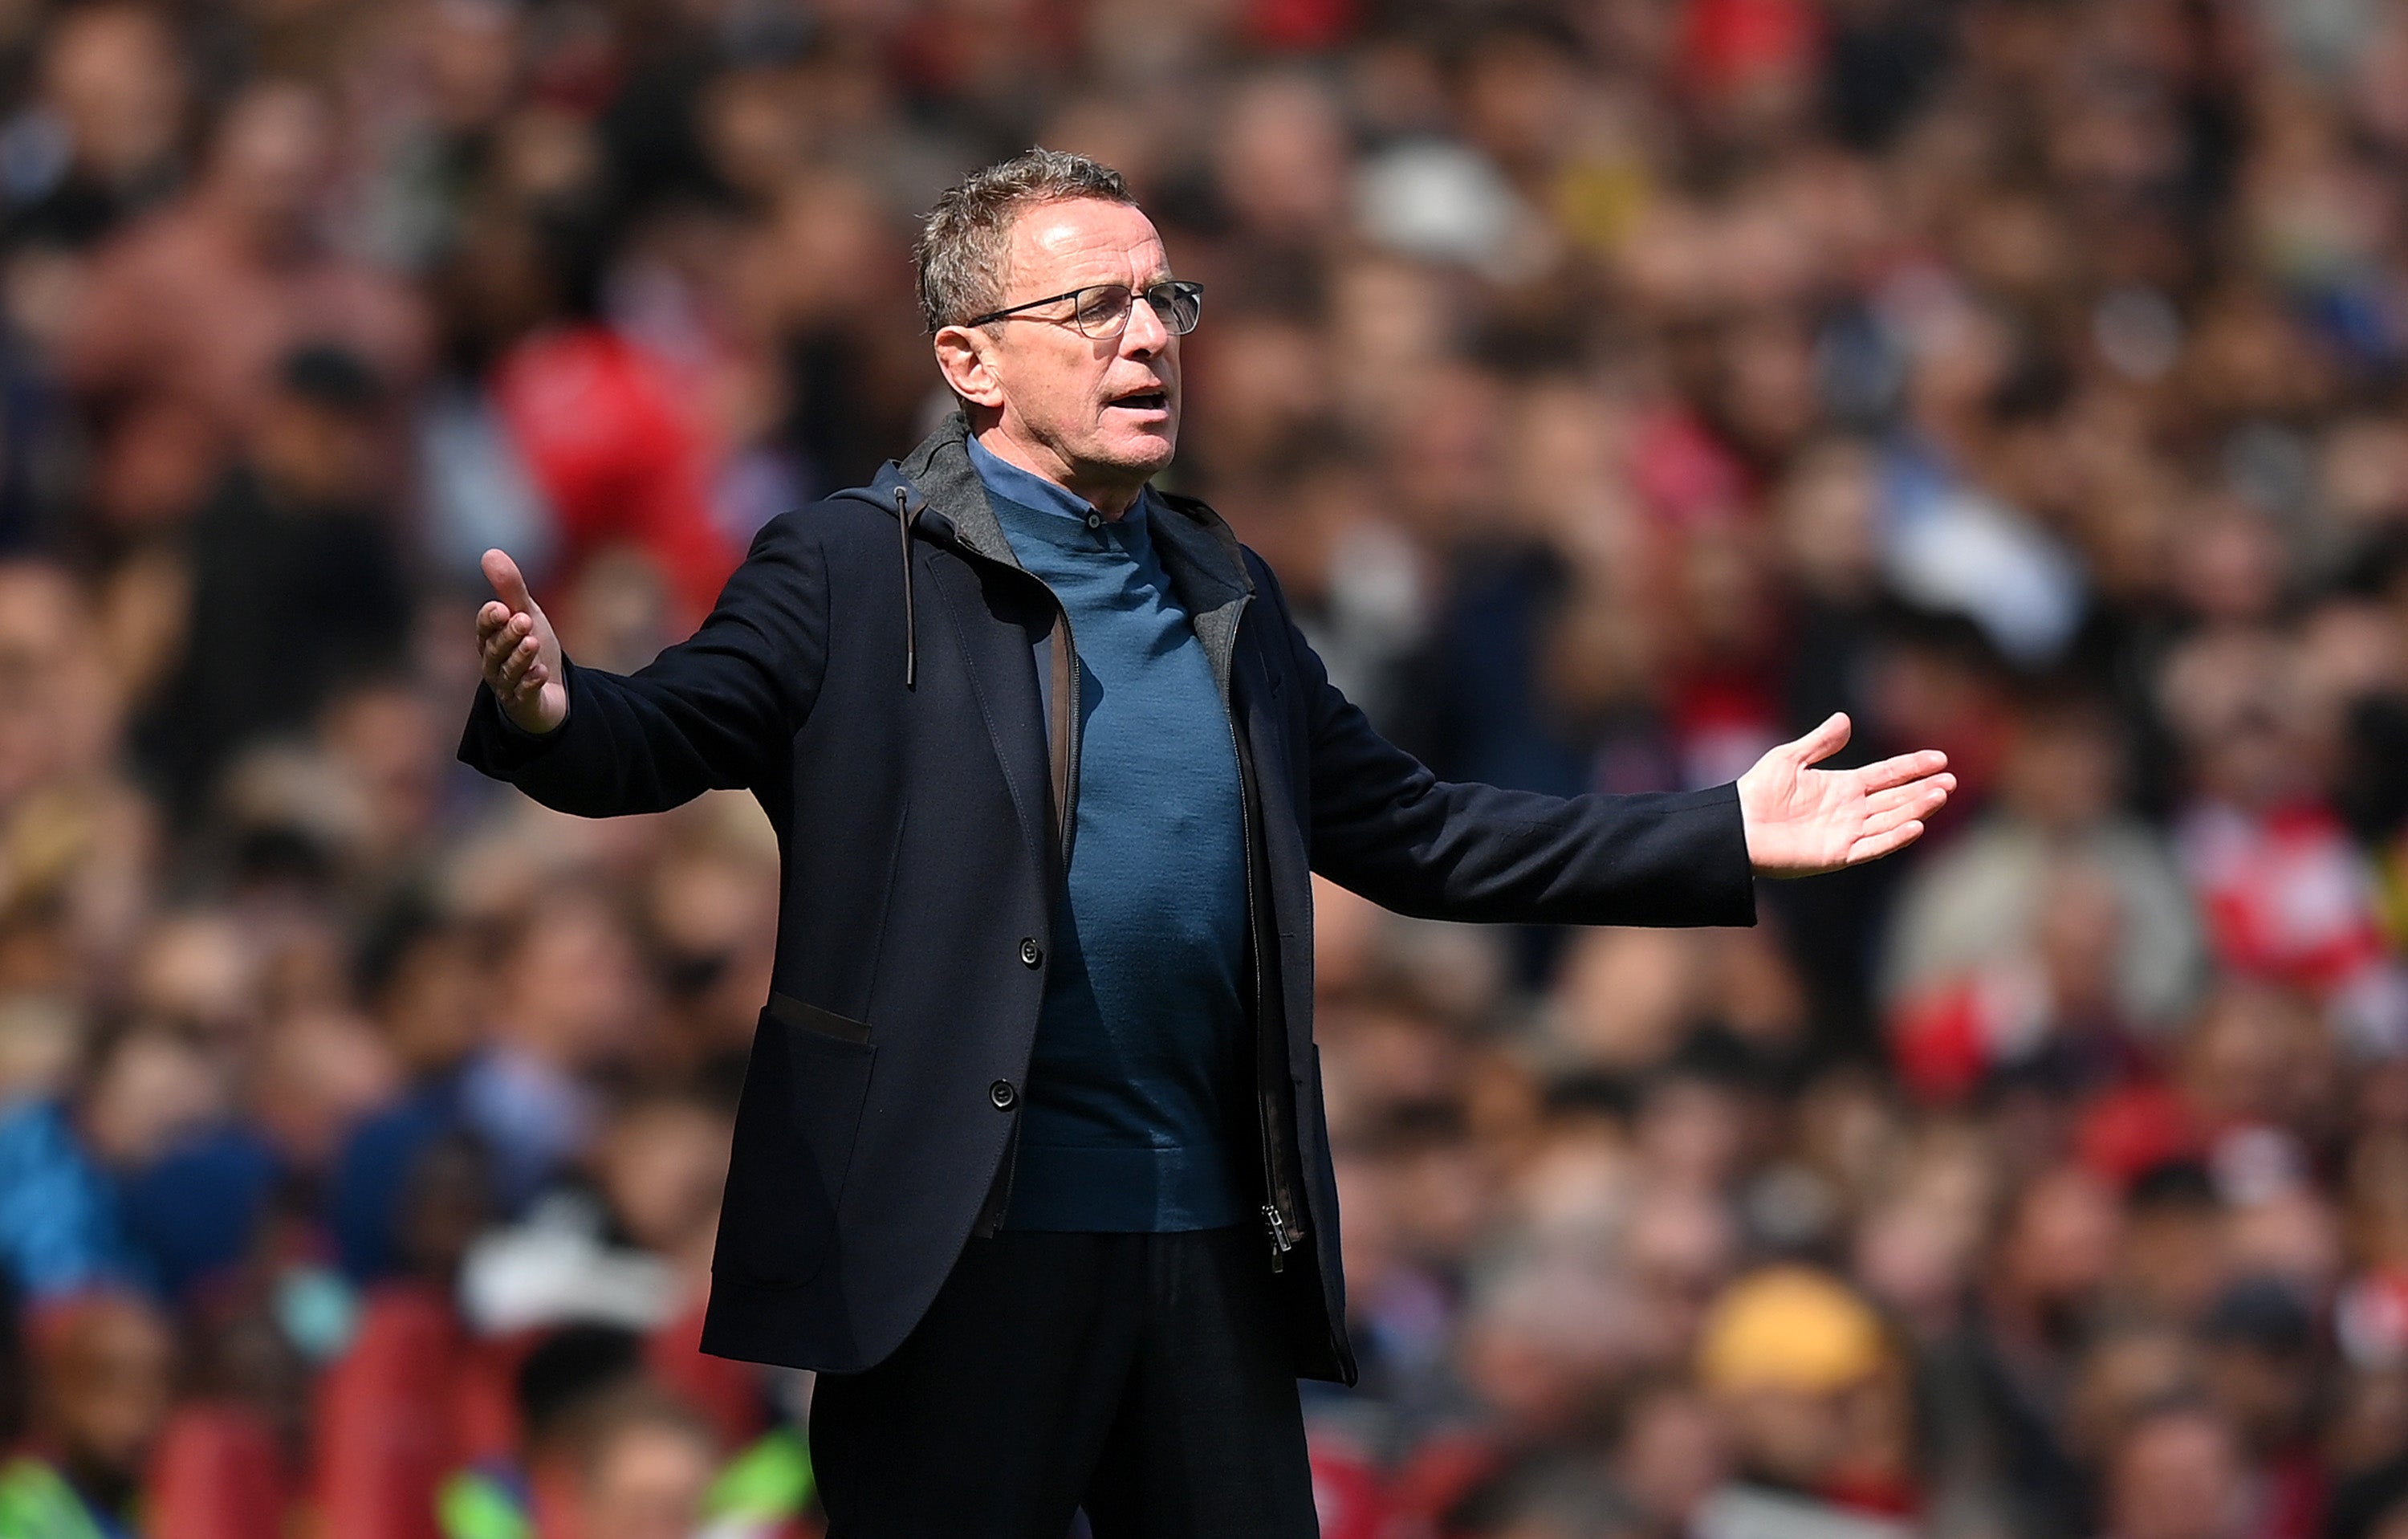 Ralf Rangnick has endured a tough spell as interim manager of Manchester United